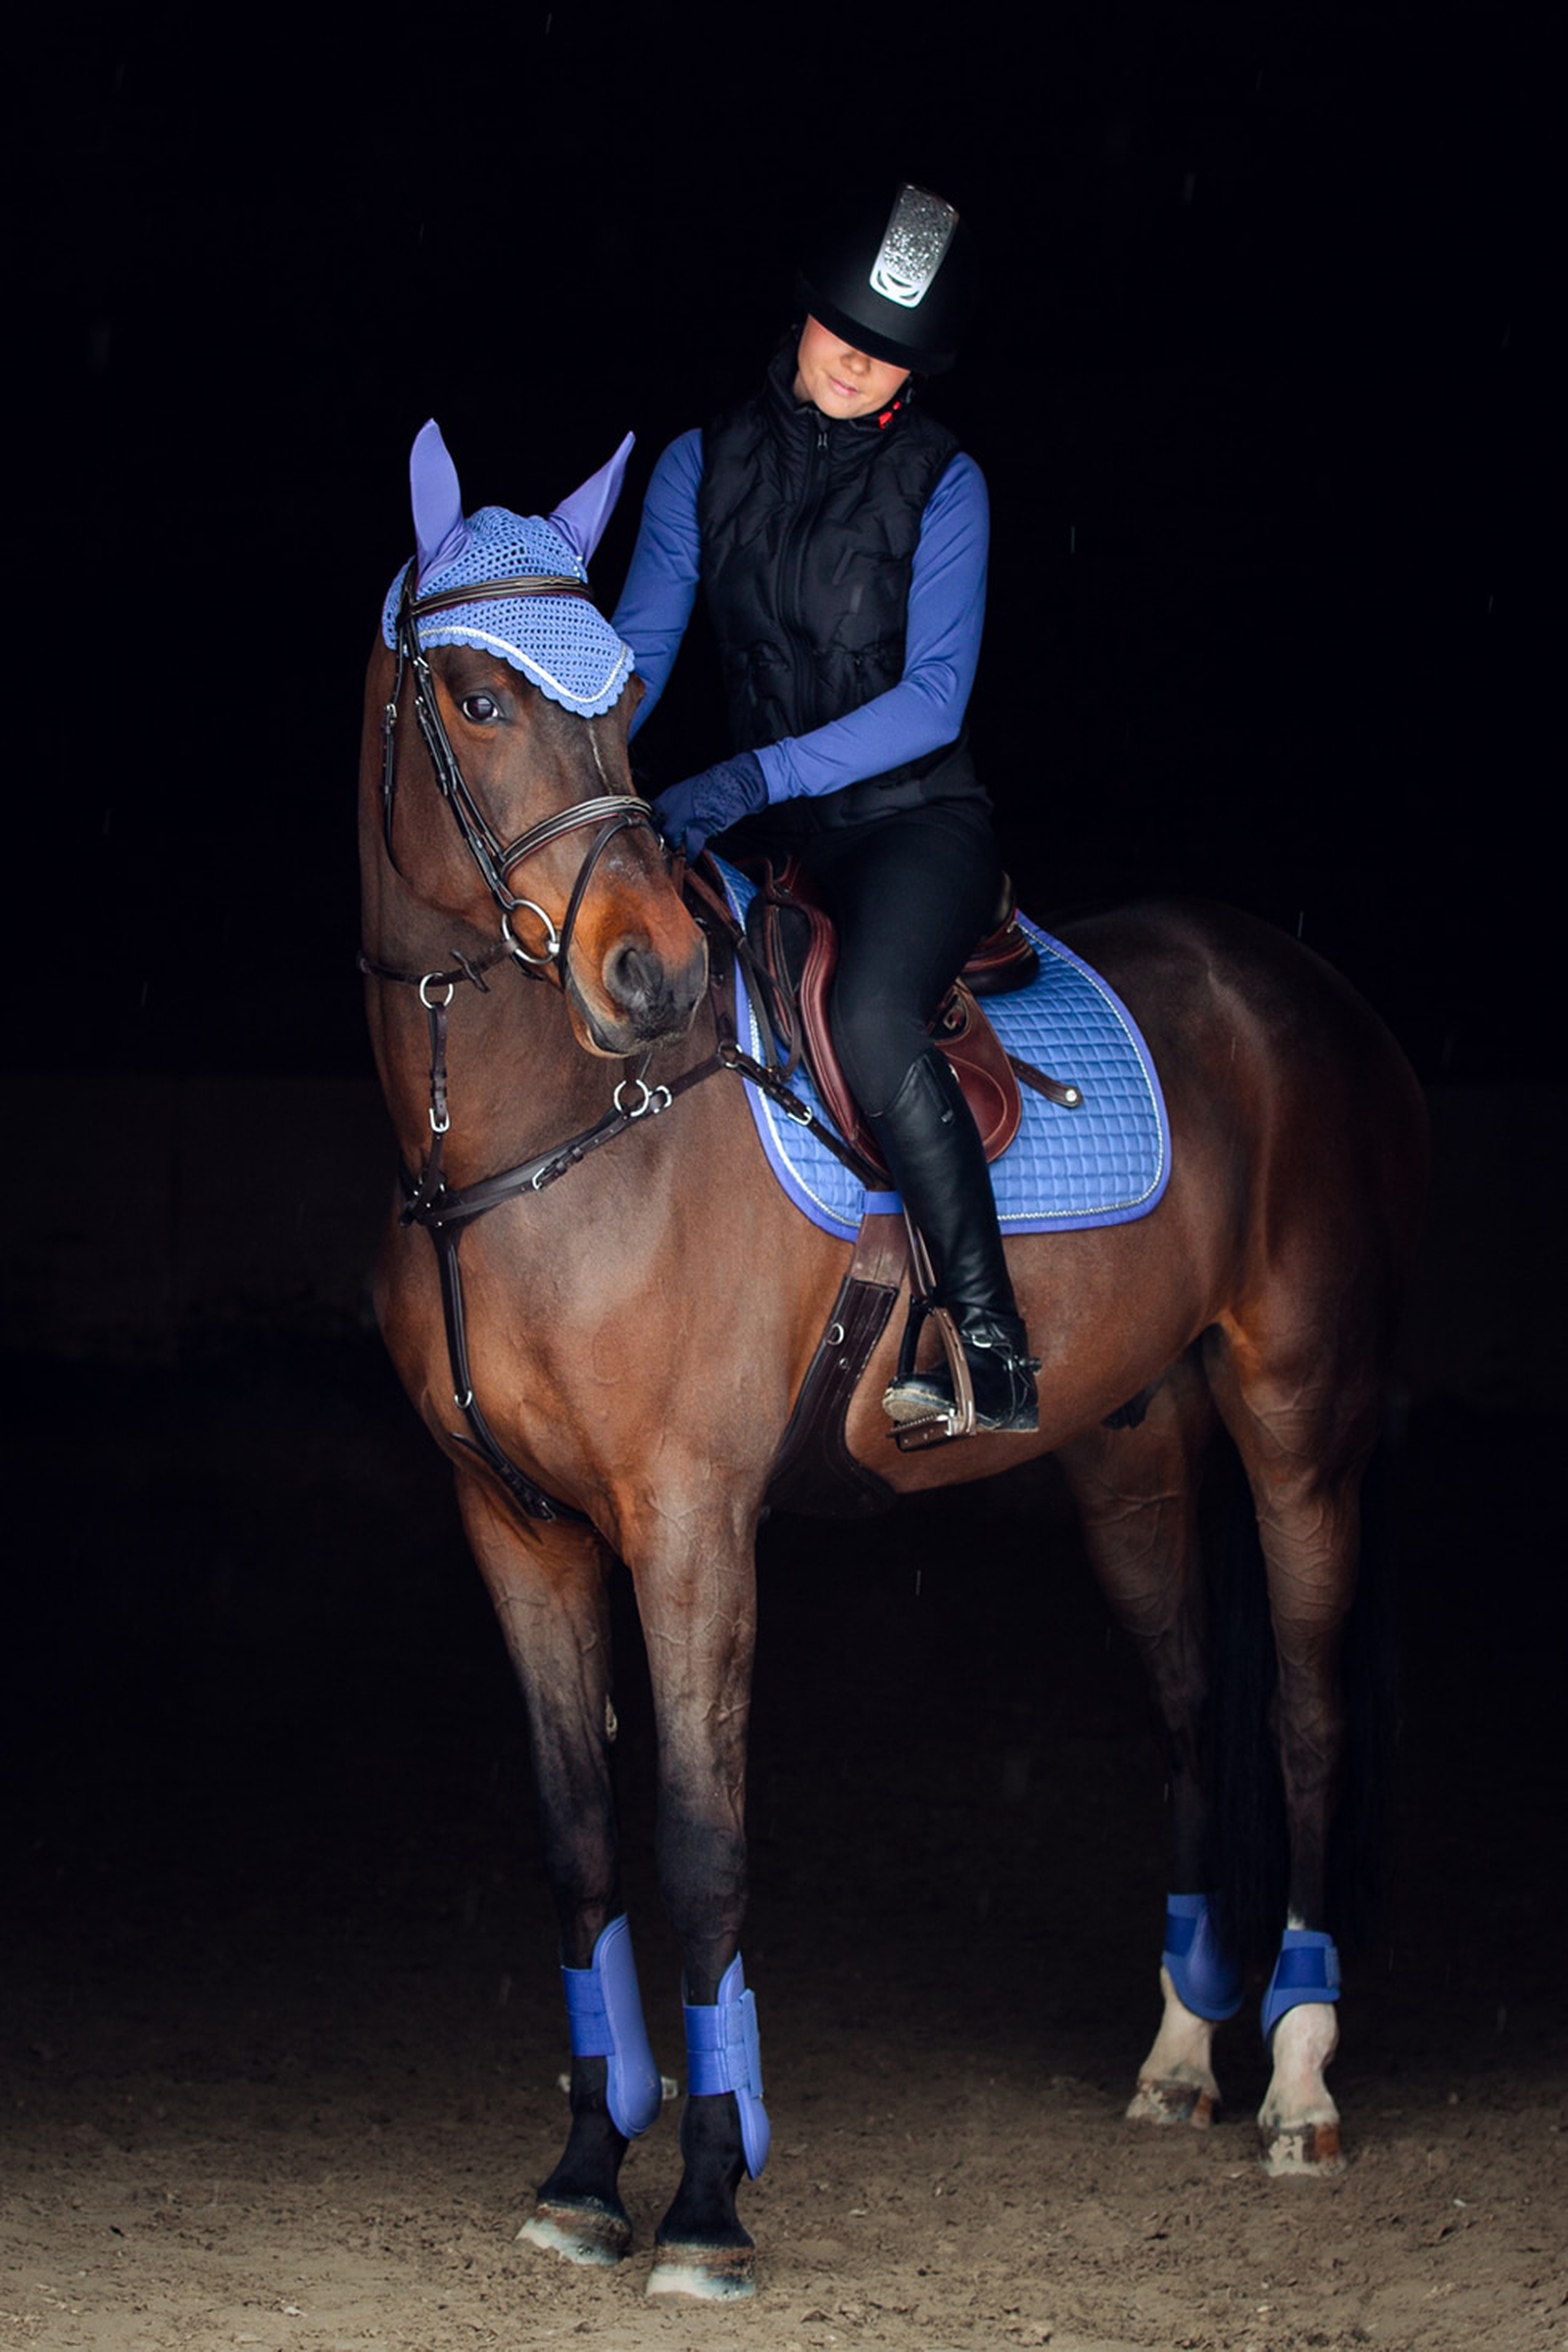 https://www.horze.fr/dw/image/v2/AATB_PRD/on/demandware.static/-/Sites-main-catalog/default/dw78b4936b/Outfits/outfits_aug_21_hrz_blue_shades_for_horse_and_rider.jpg?sw=1600&q=100&filename=horze-blue-shades-for-horse-and-rider-horze-blue-shades-for-horse-and-rider.jpg